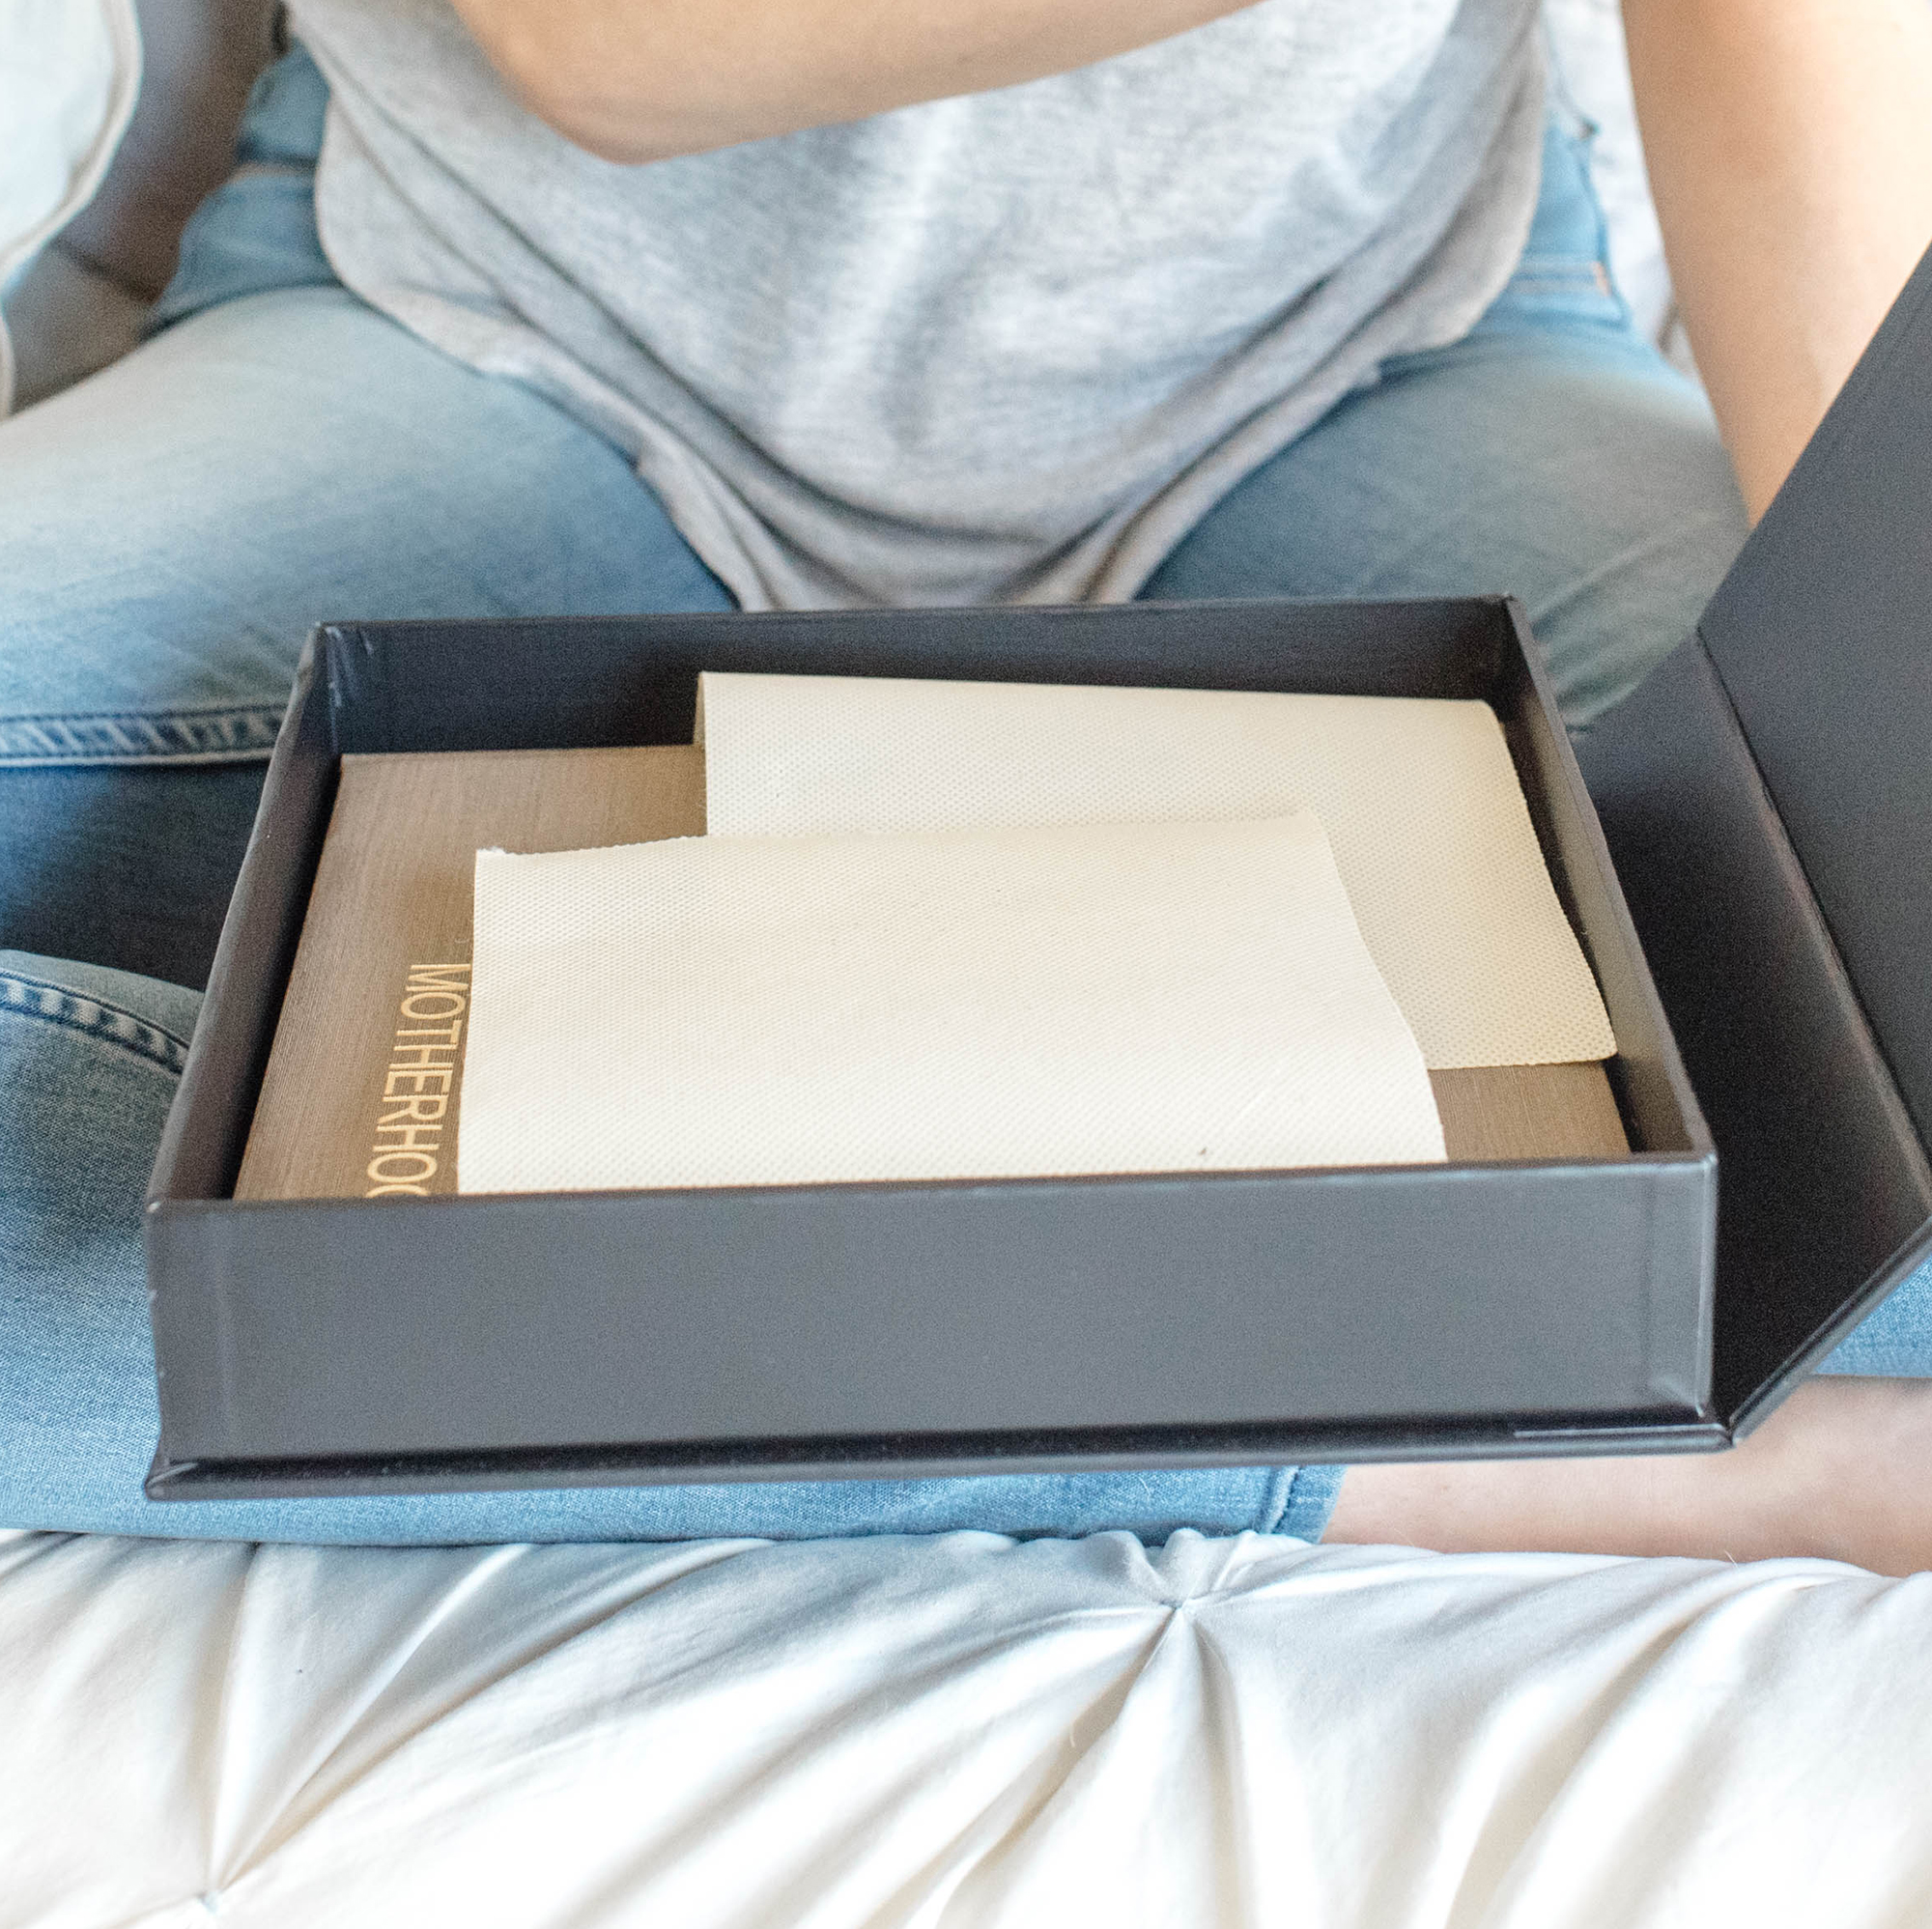 Women viewing photo book in a gift box